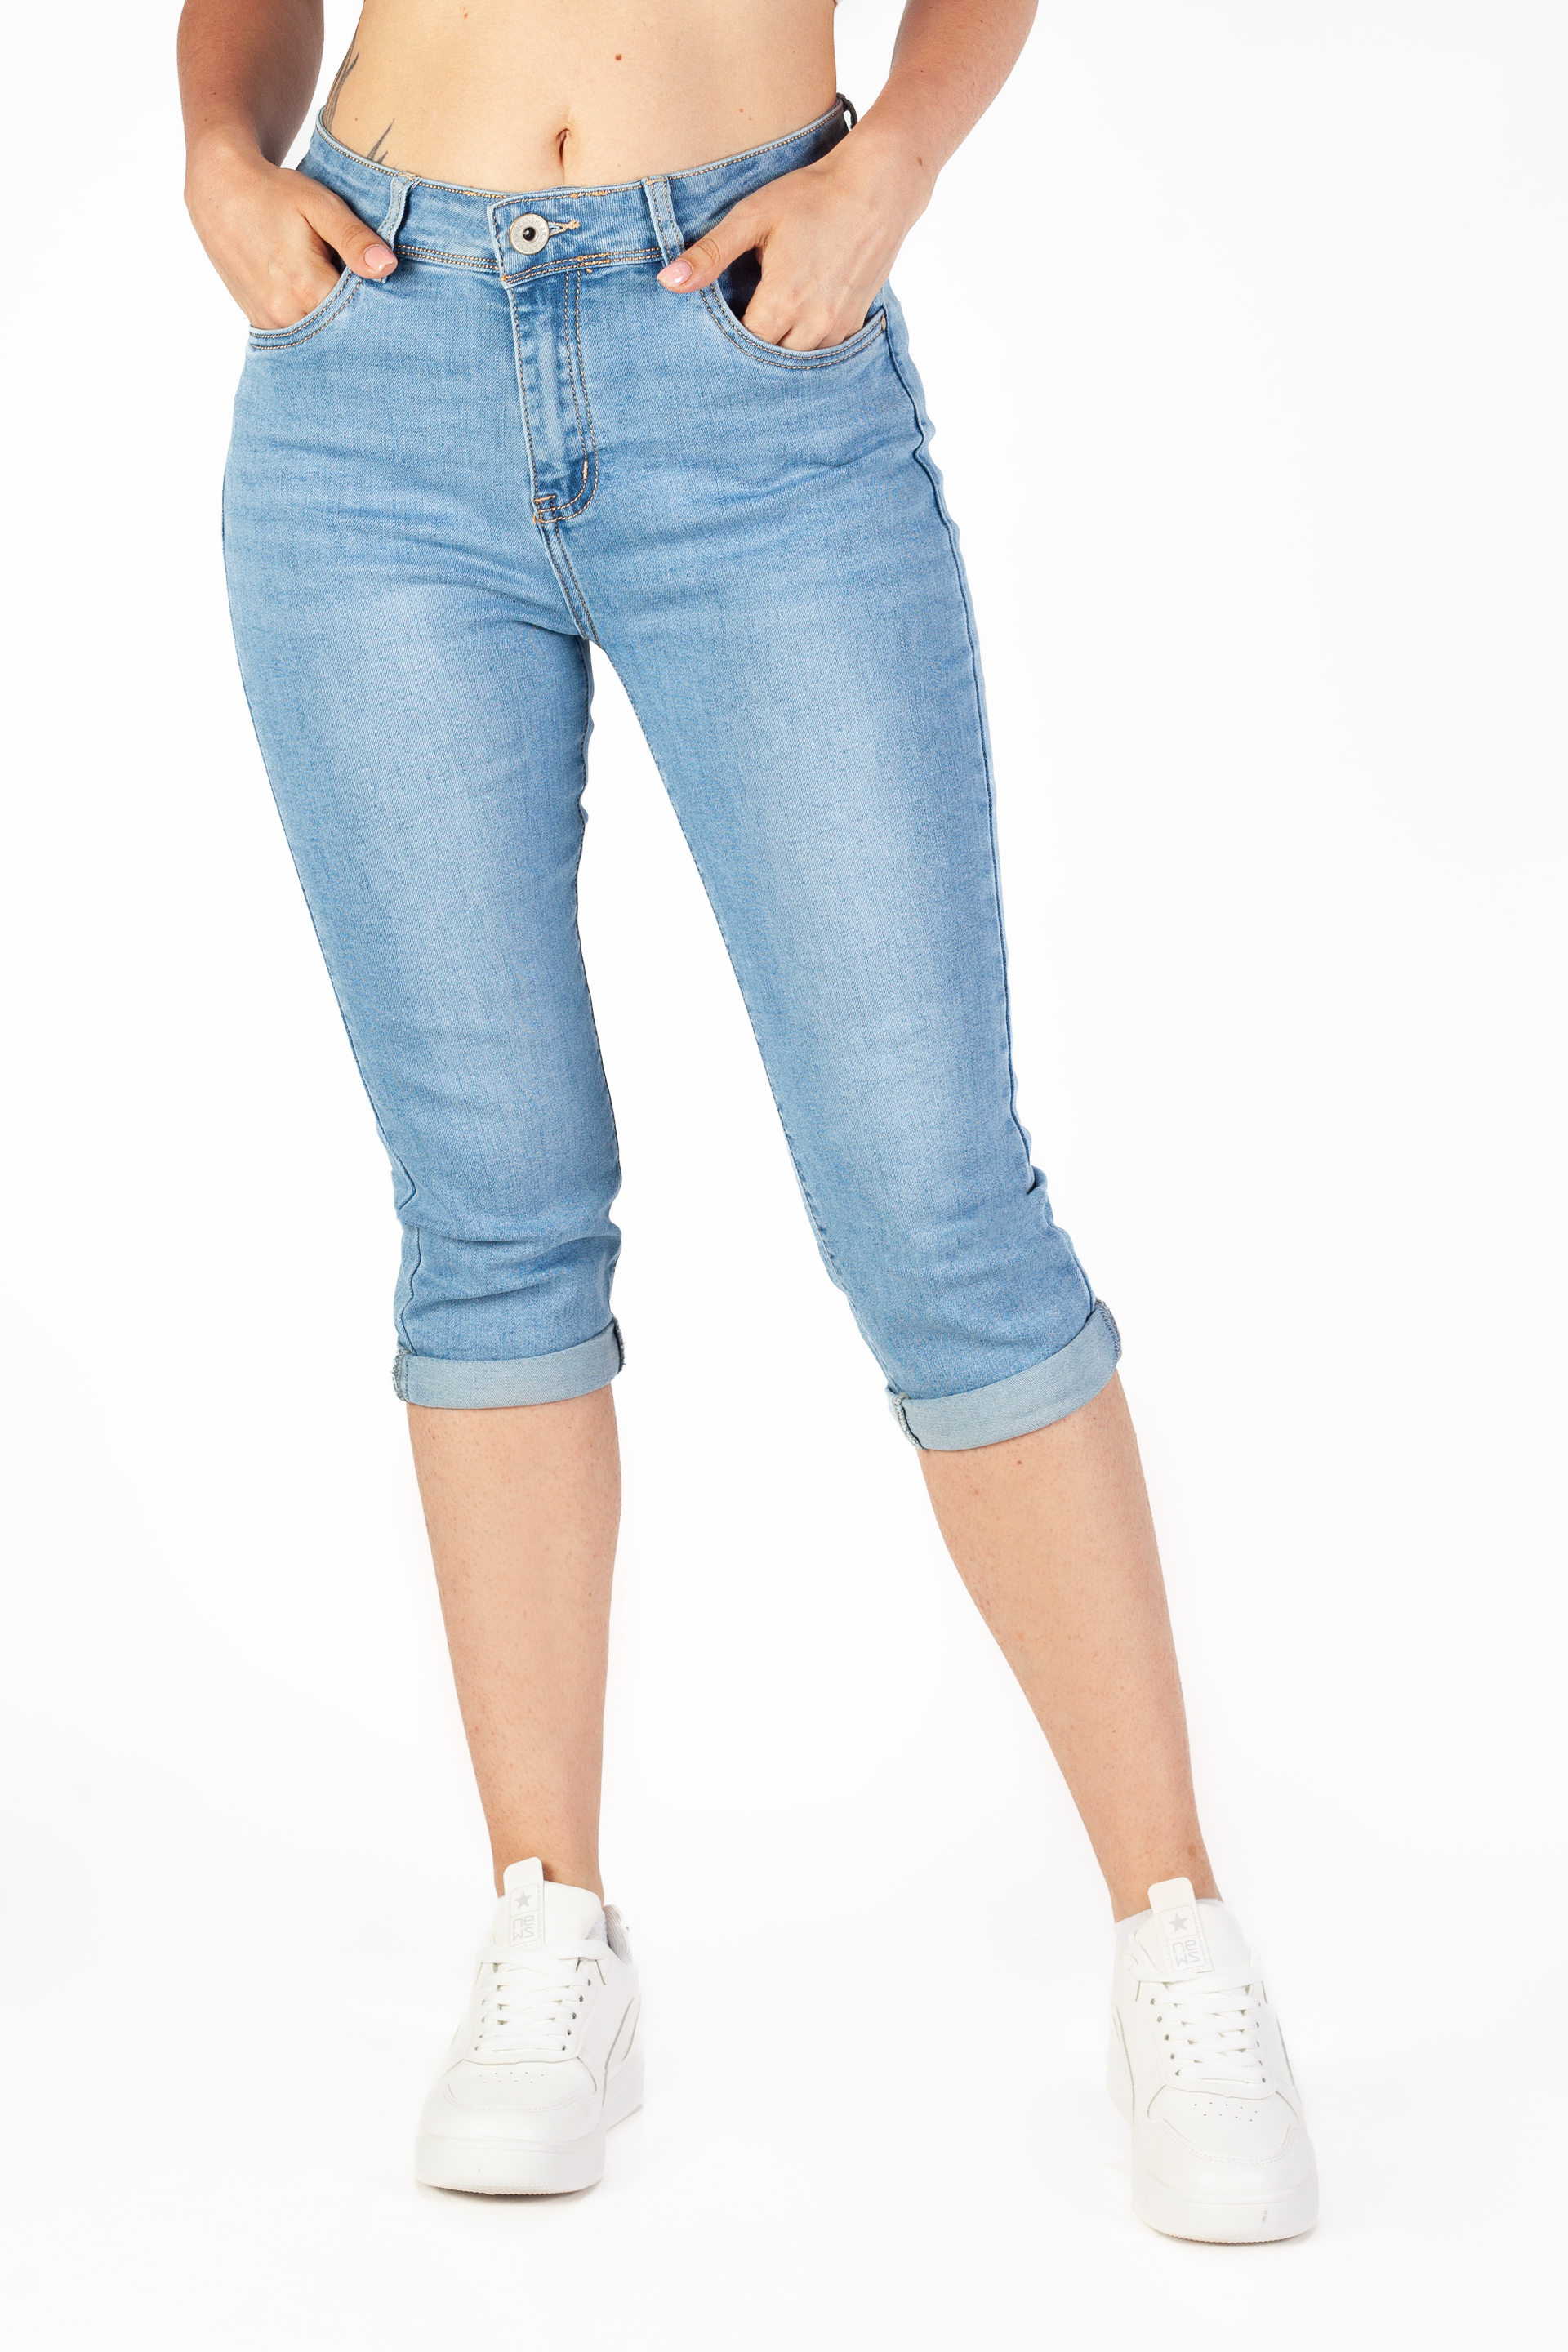 Jeansshorts NORFY BC7578-1